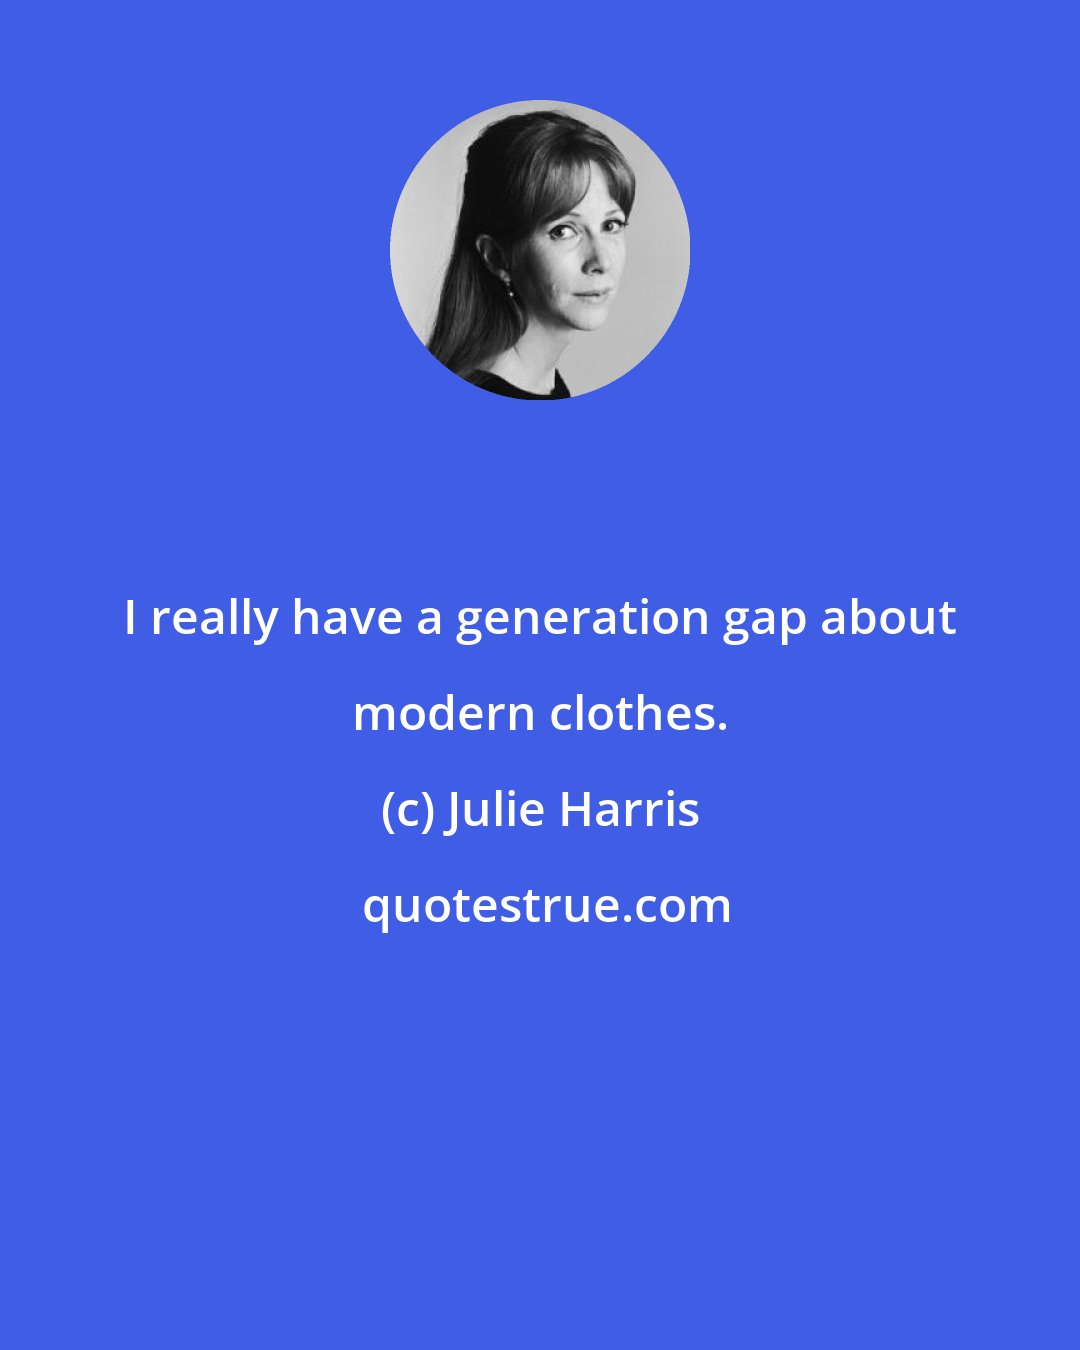 Julie Harris: I really have a generation gap about modern clothes.